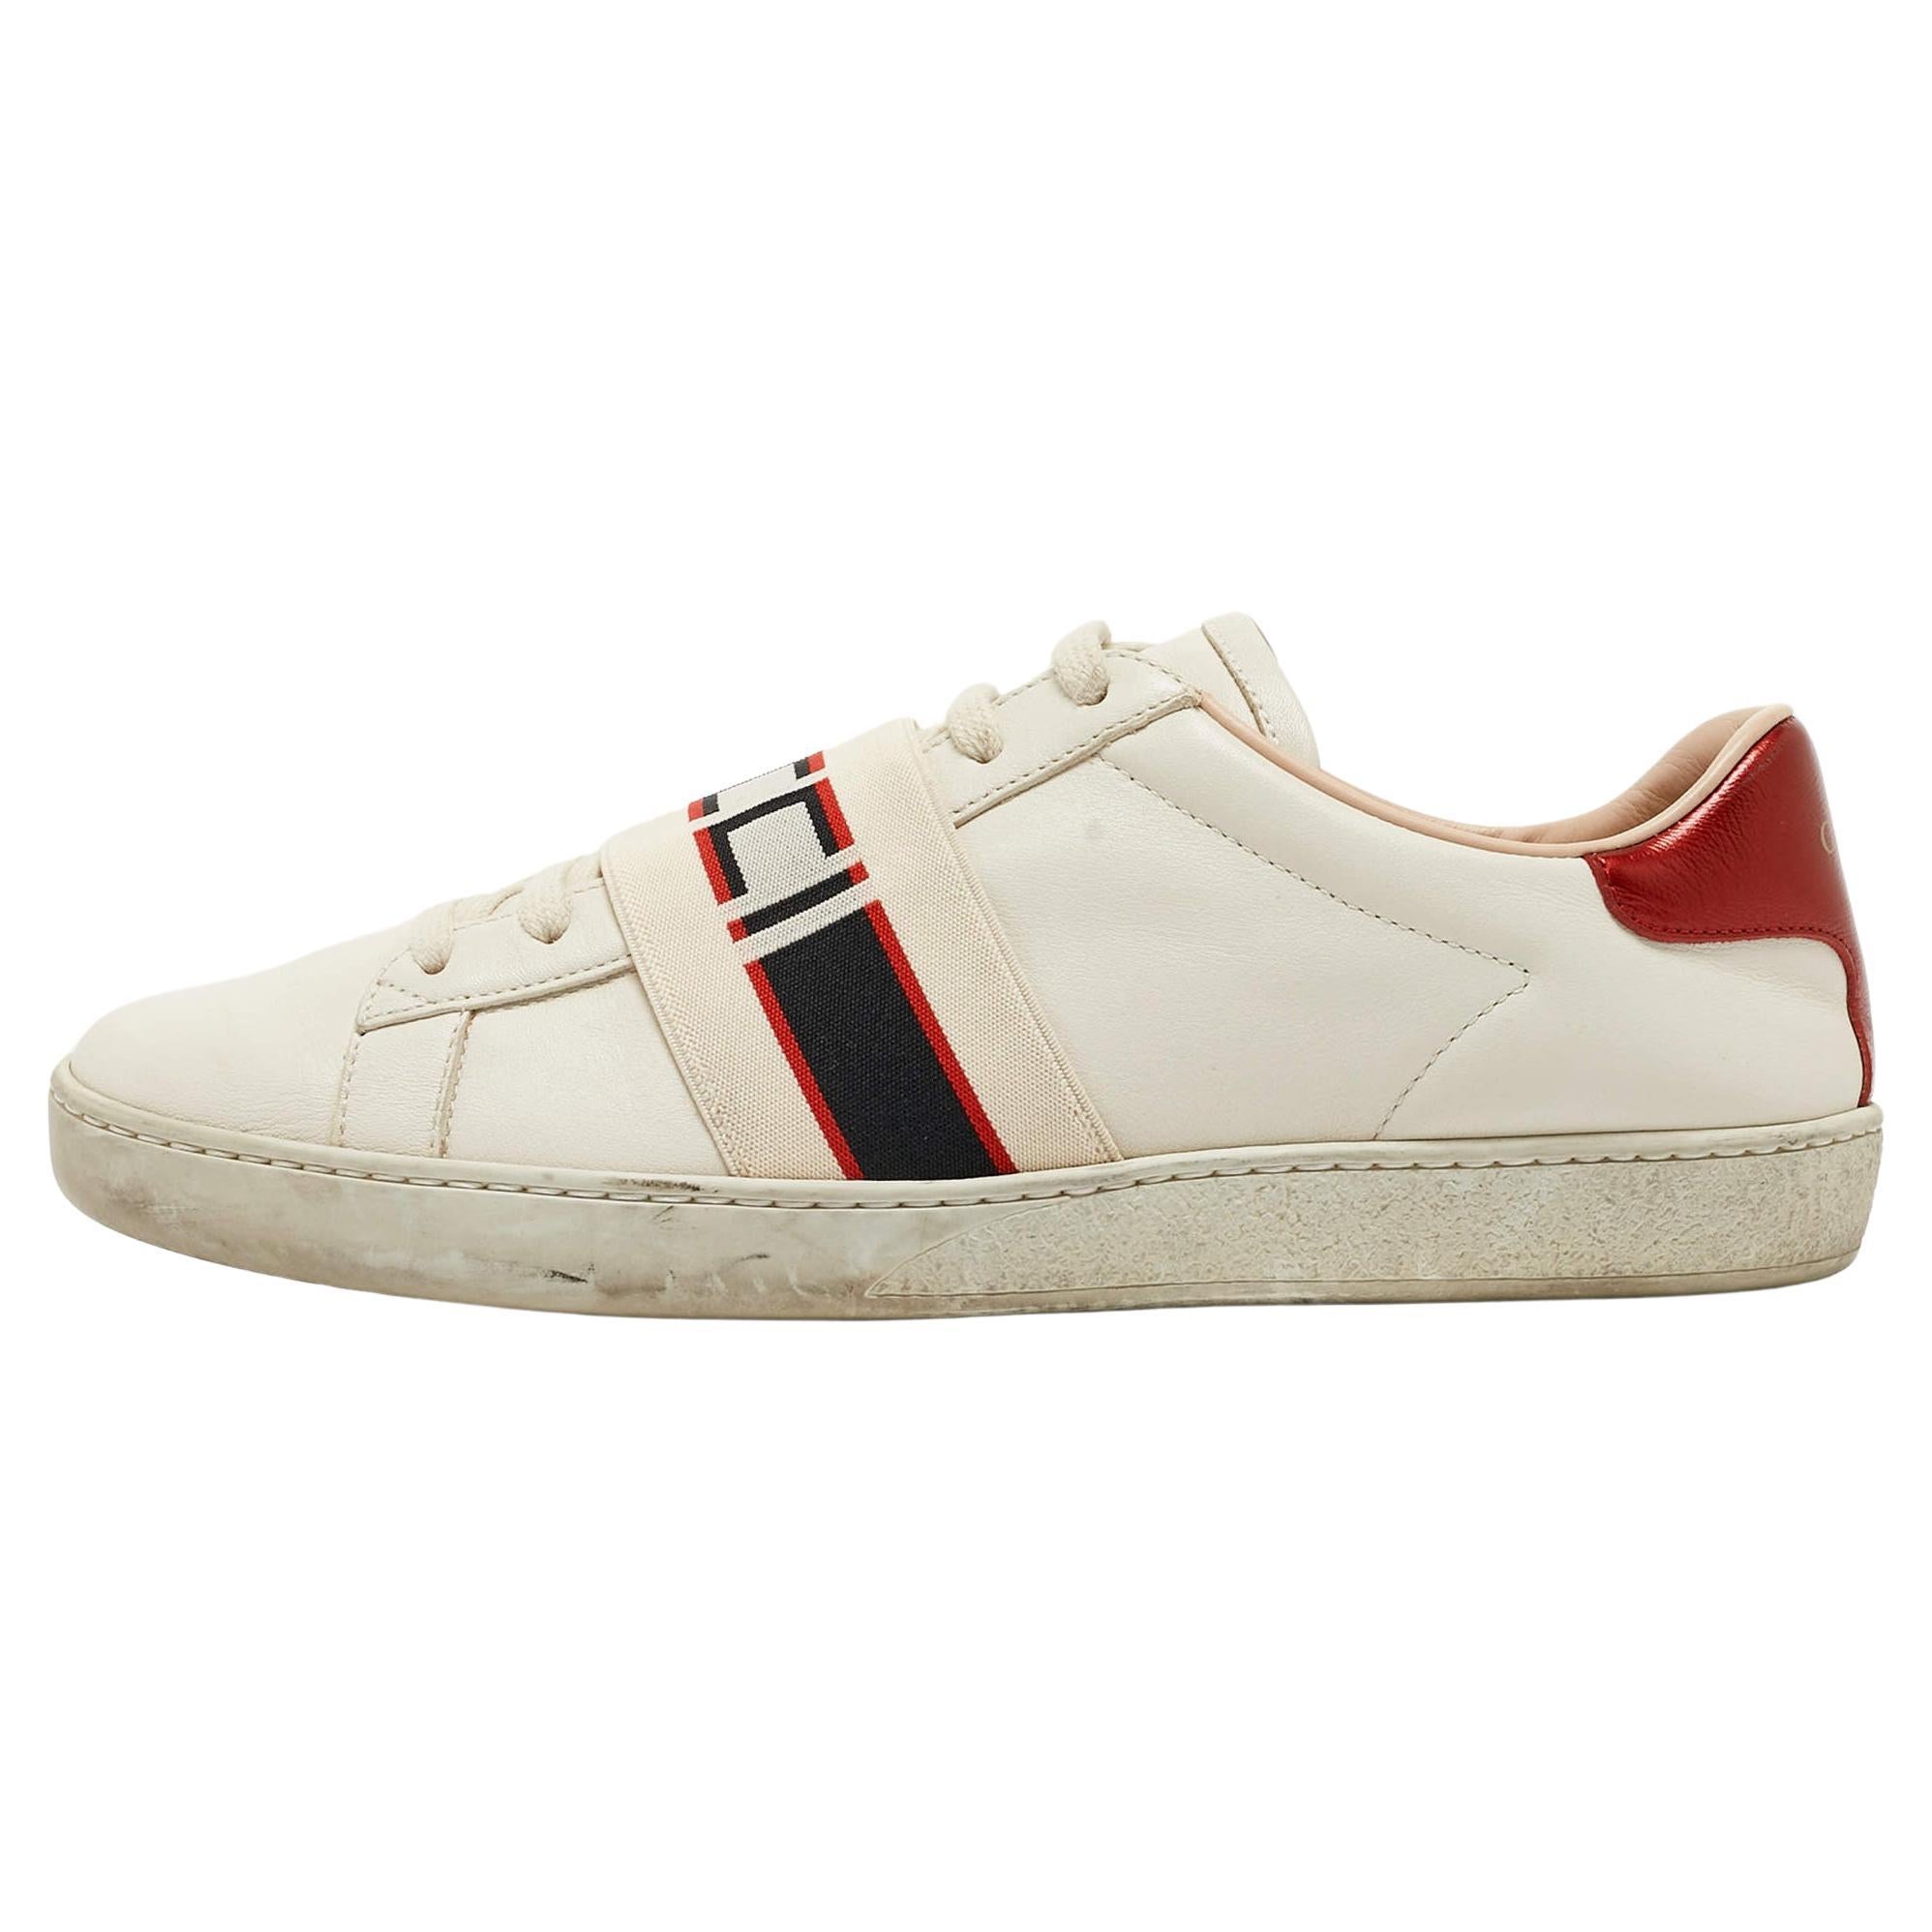 Gucci Off White/Red Leather Ace Stripe Sneakers Size 39 For Sale